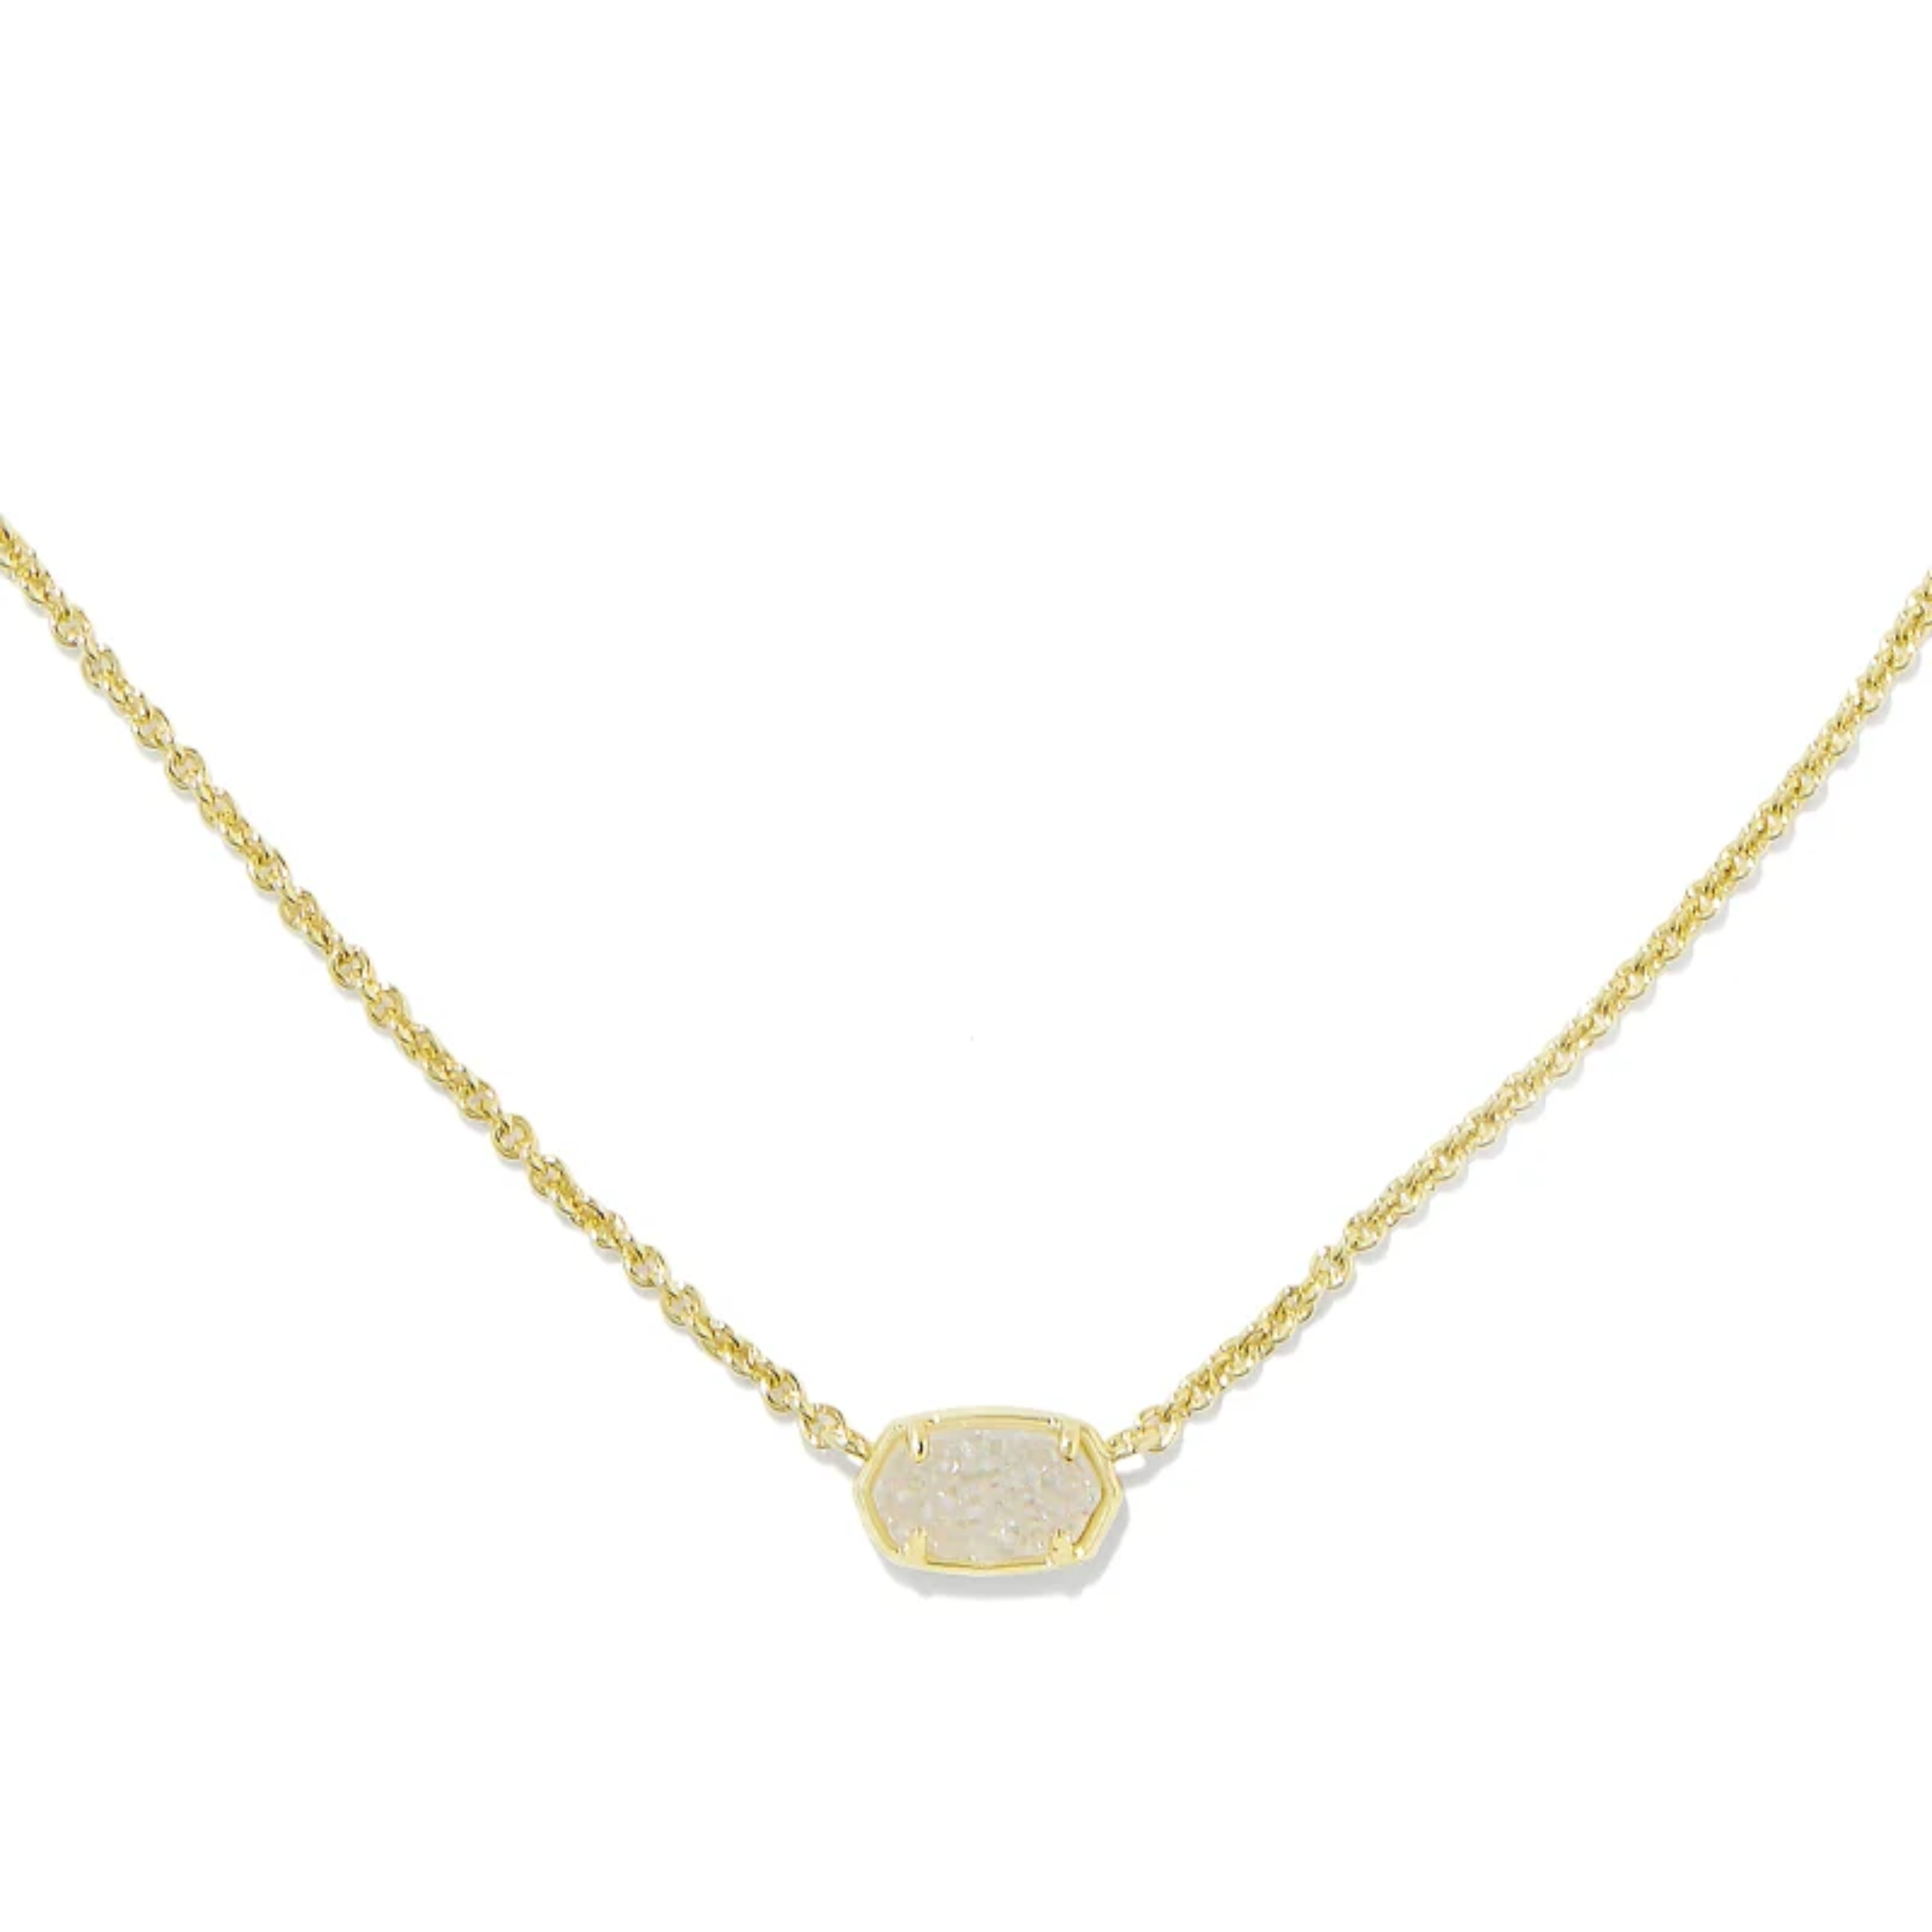 This Emilie Gold Short Pendant Necklace in Iridescent Drusy by Kendra Scott is pictured on a white background.